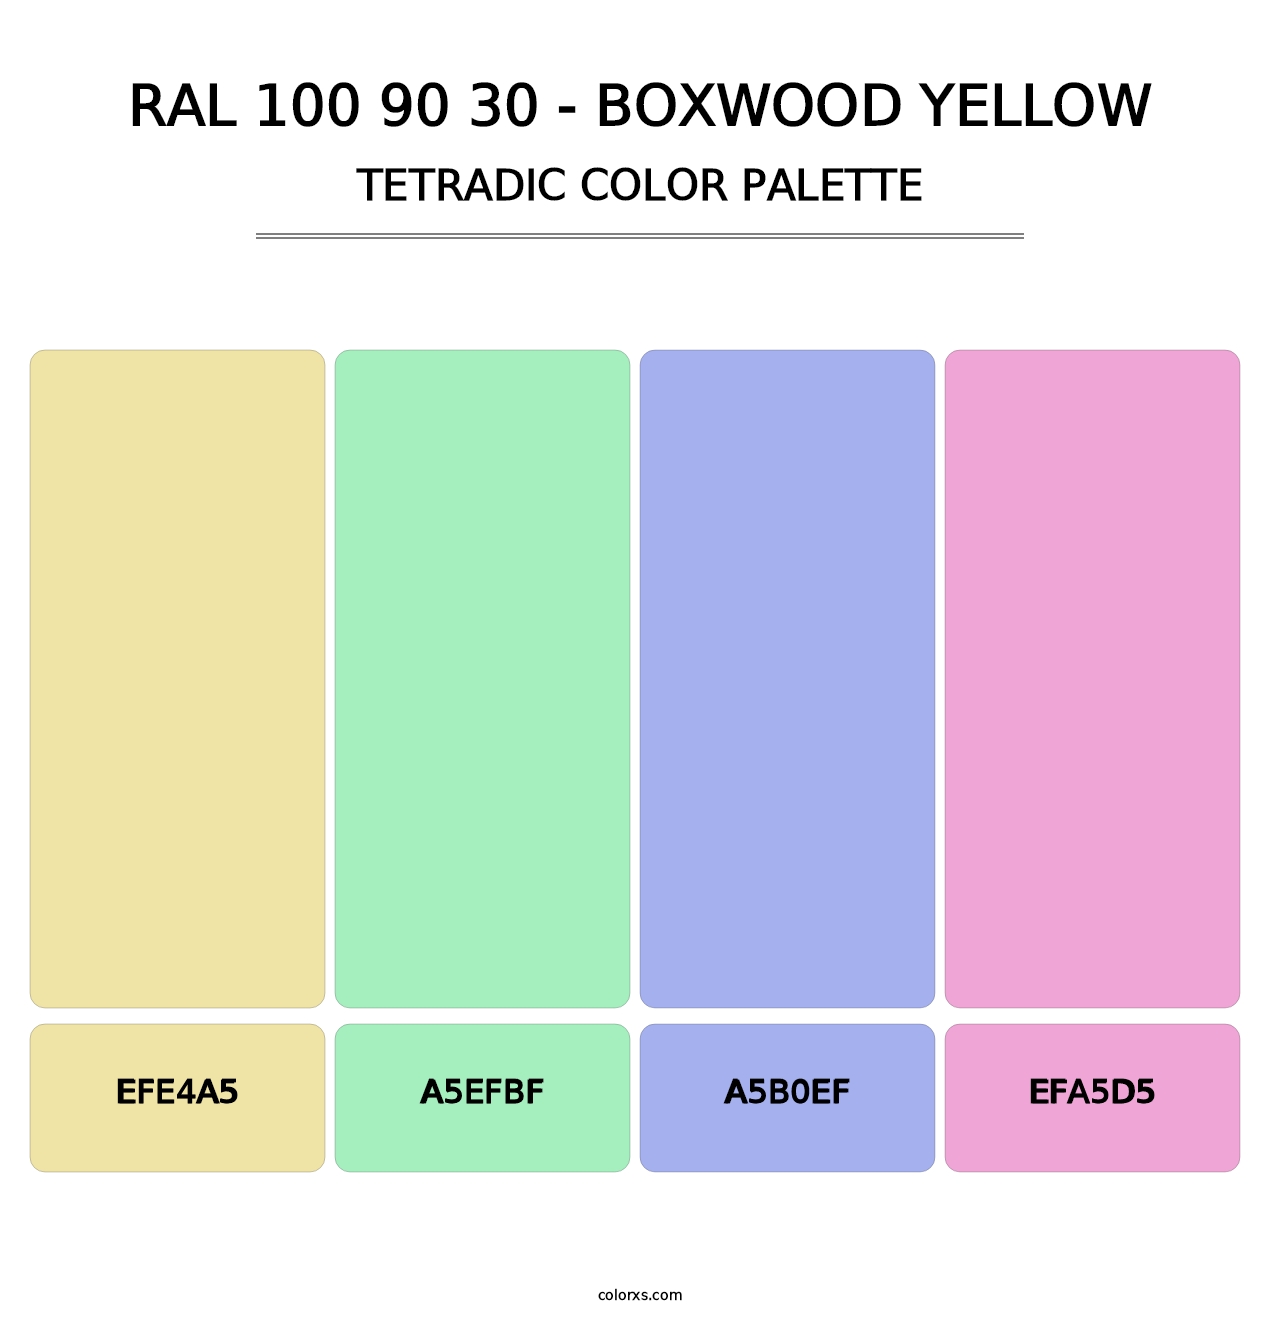 RAL 100 90 30 - Boxwood Yellow - Tetradic Color Palette